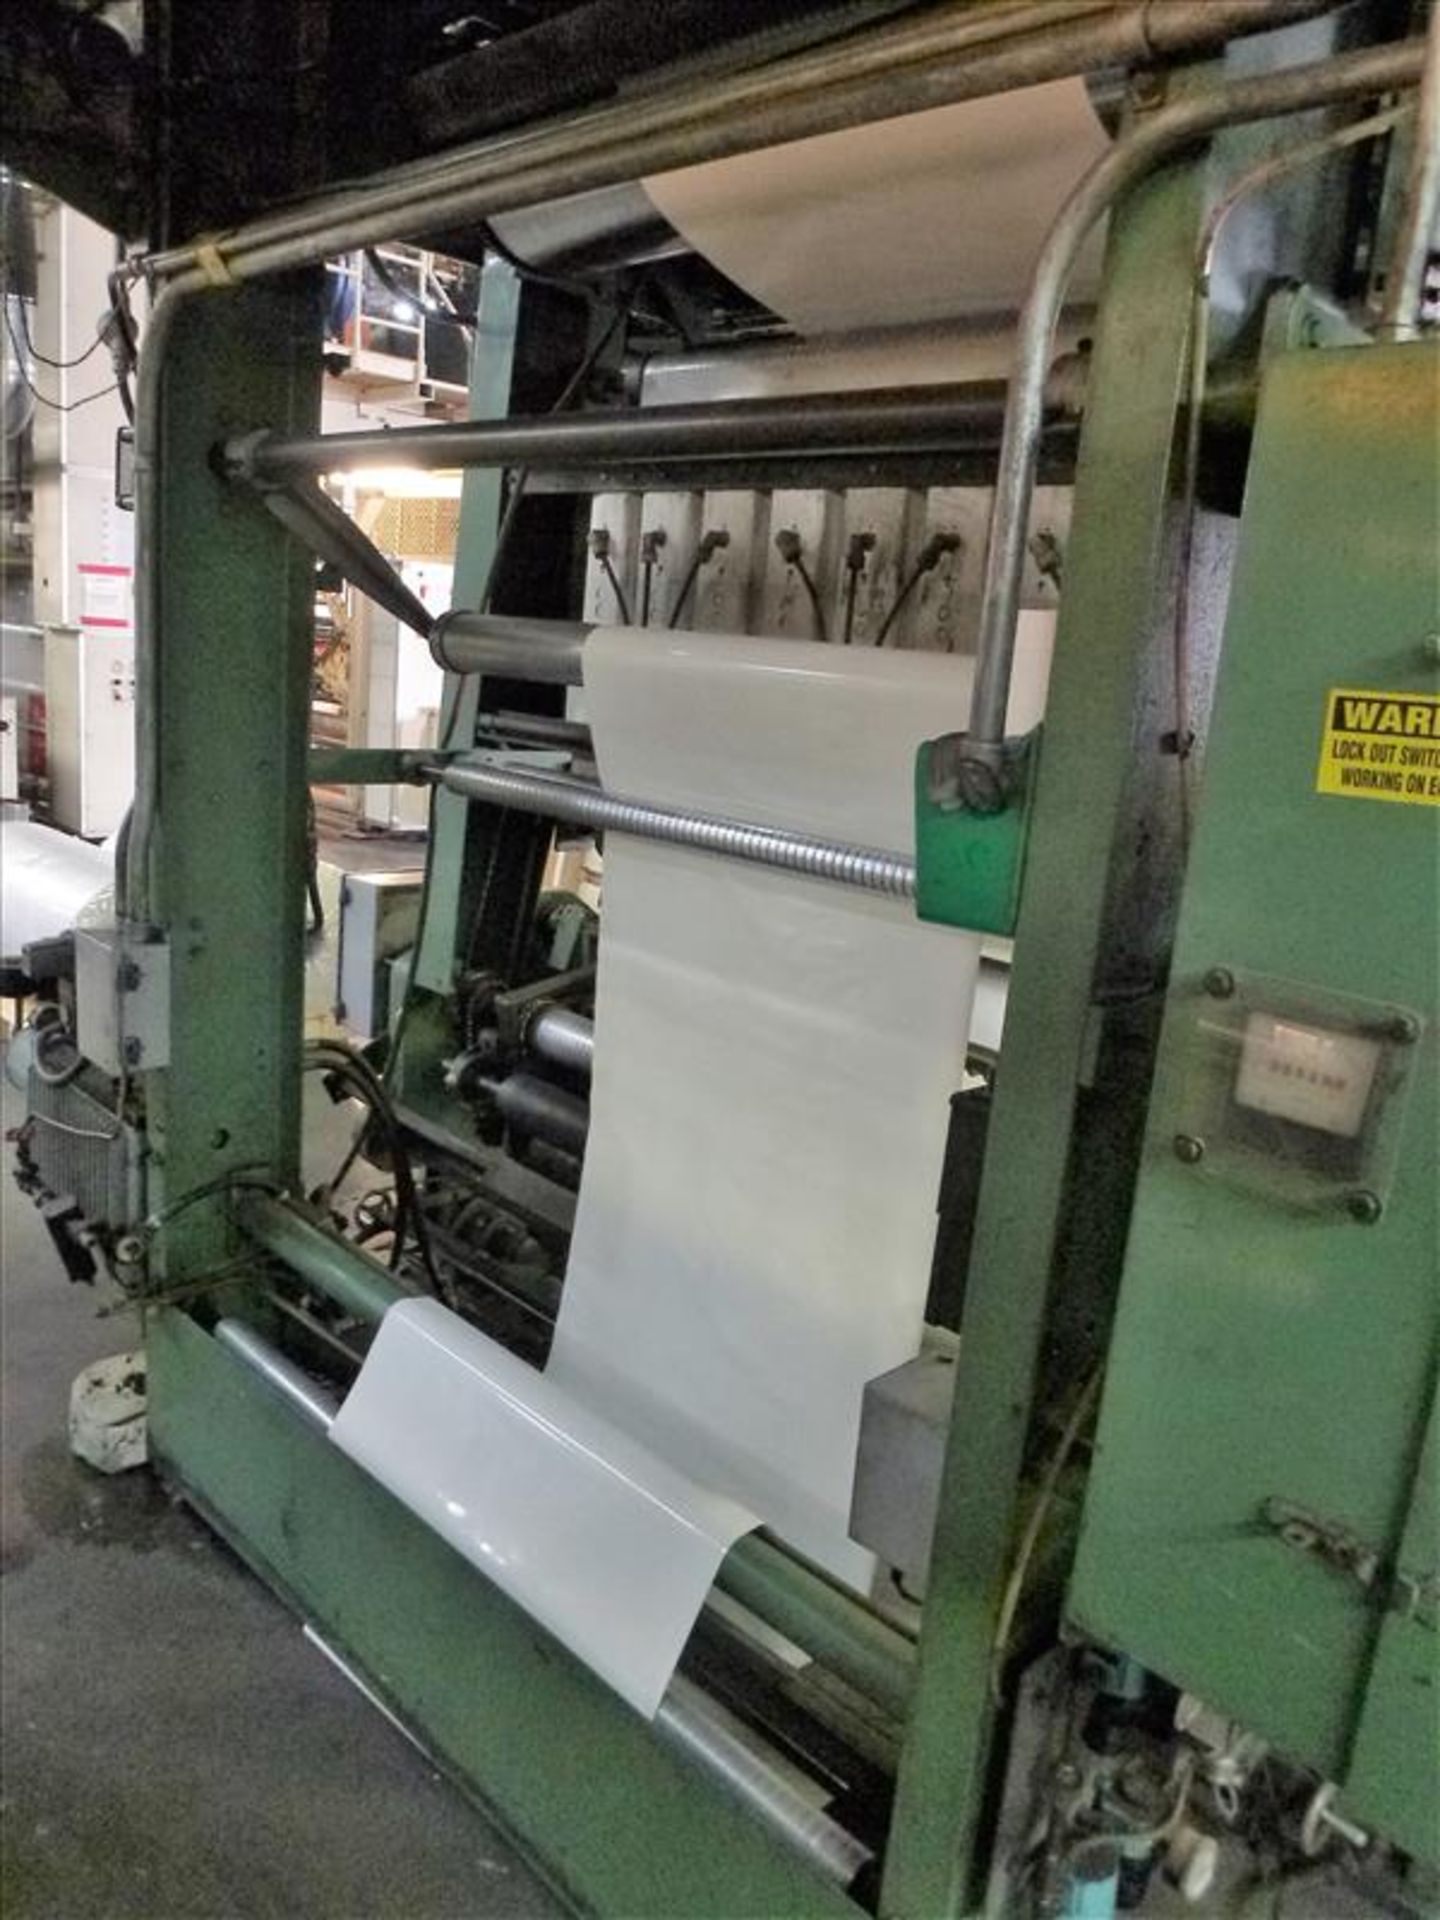 PCMC (Paper Converting Machine Co.) 6-colour central impression flexographic printing press, 56" - Image 20 of 30